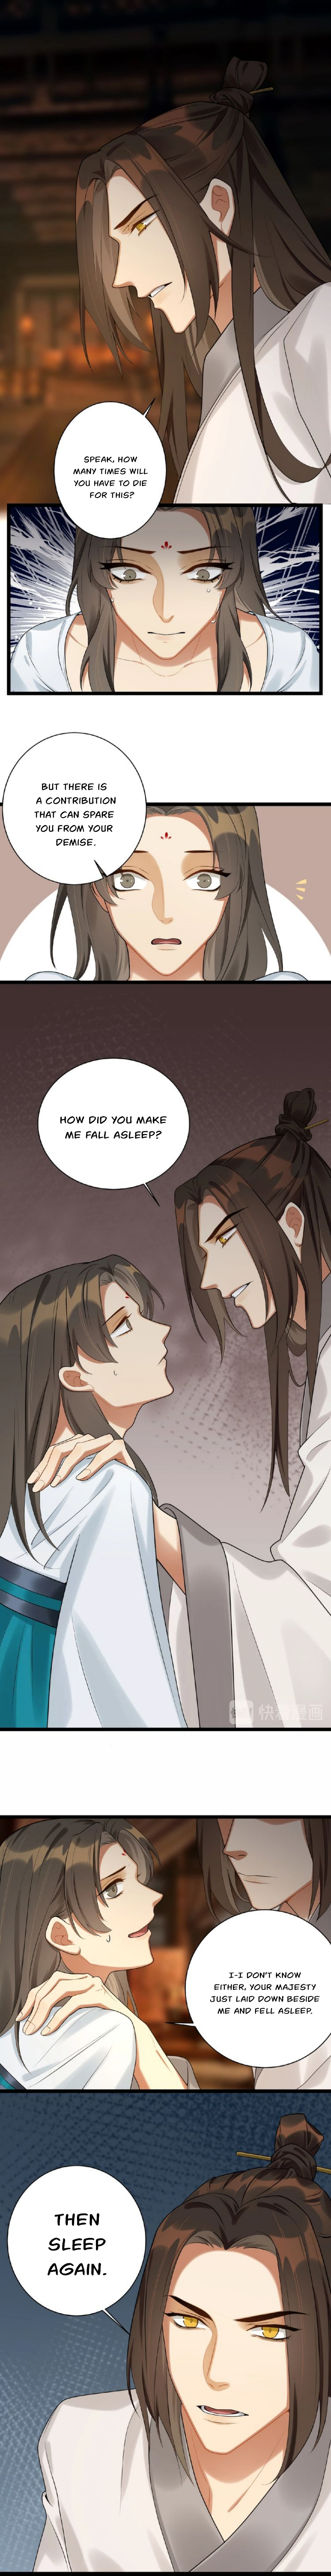 Please Fall Asleep, Emperor Ch. 3 The Emperor and the Assassin